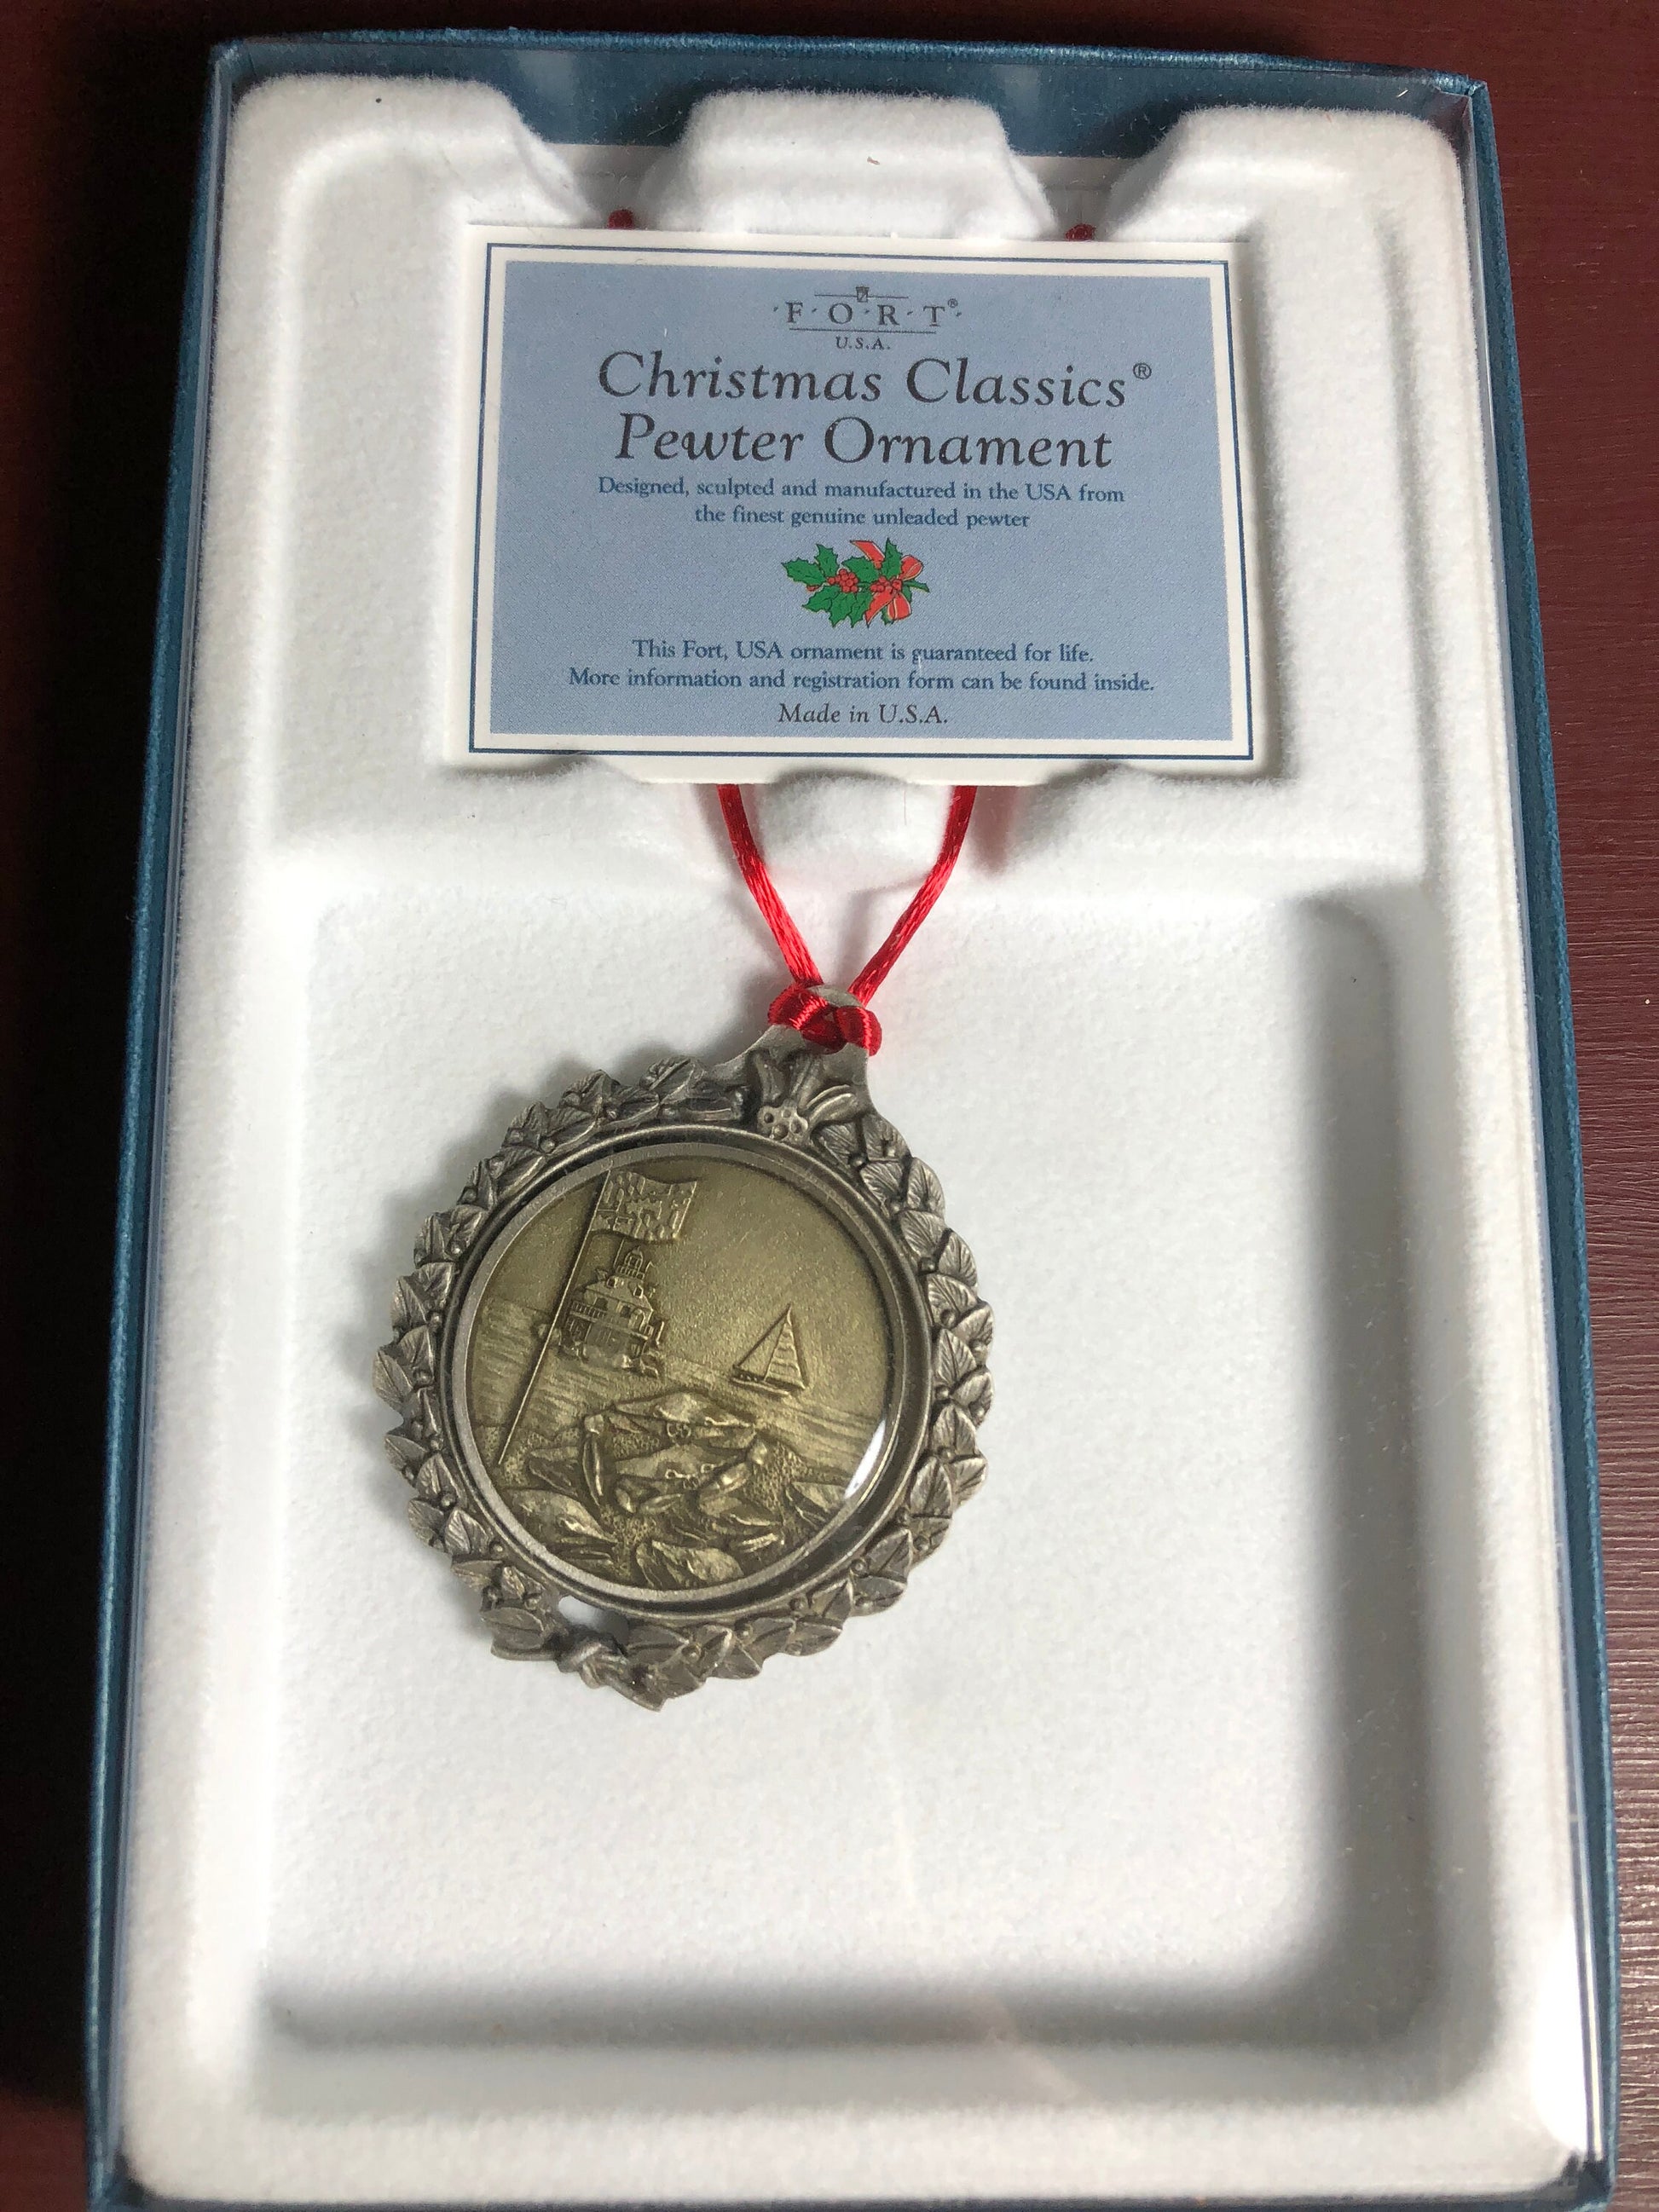 Pewter, Fort USA, Maryland Blue Crab, Christmas, Classics, Ornament